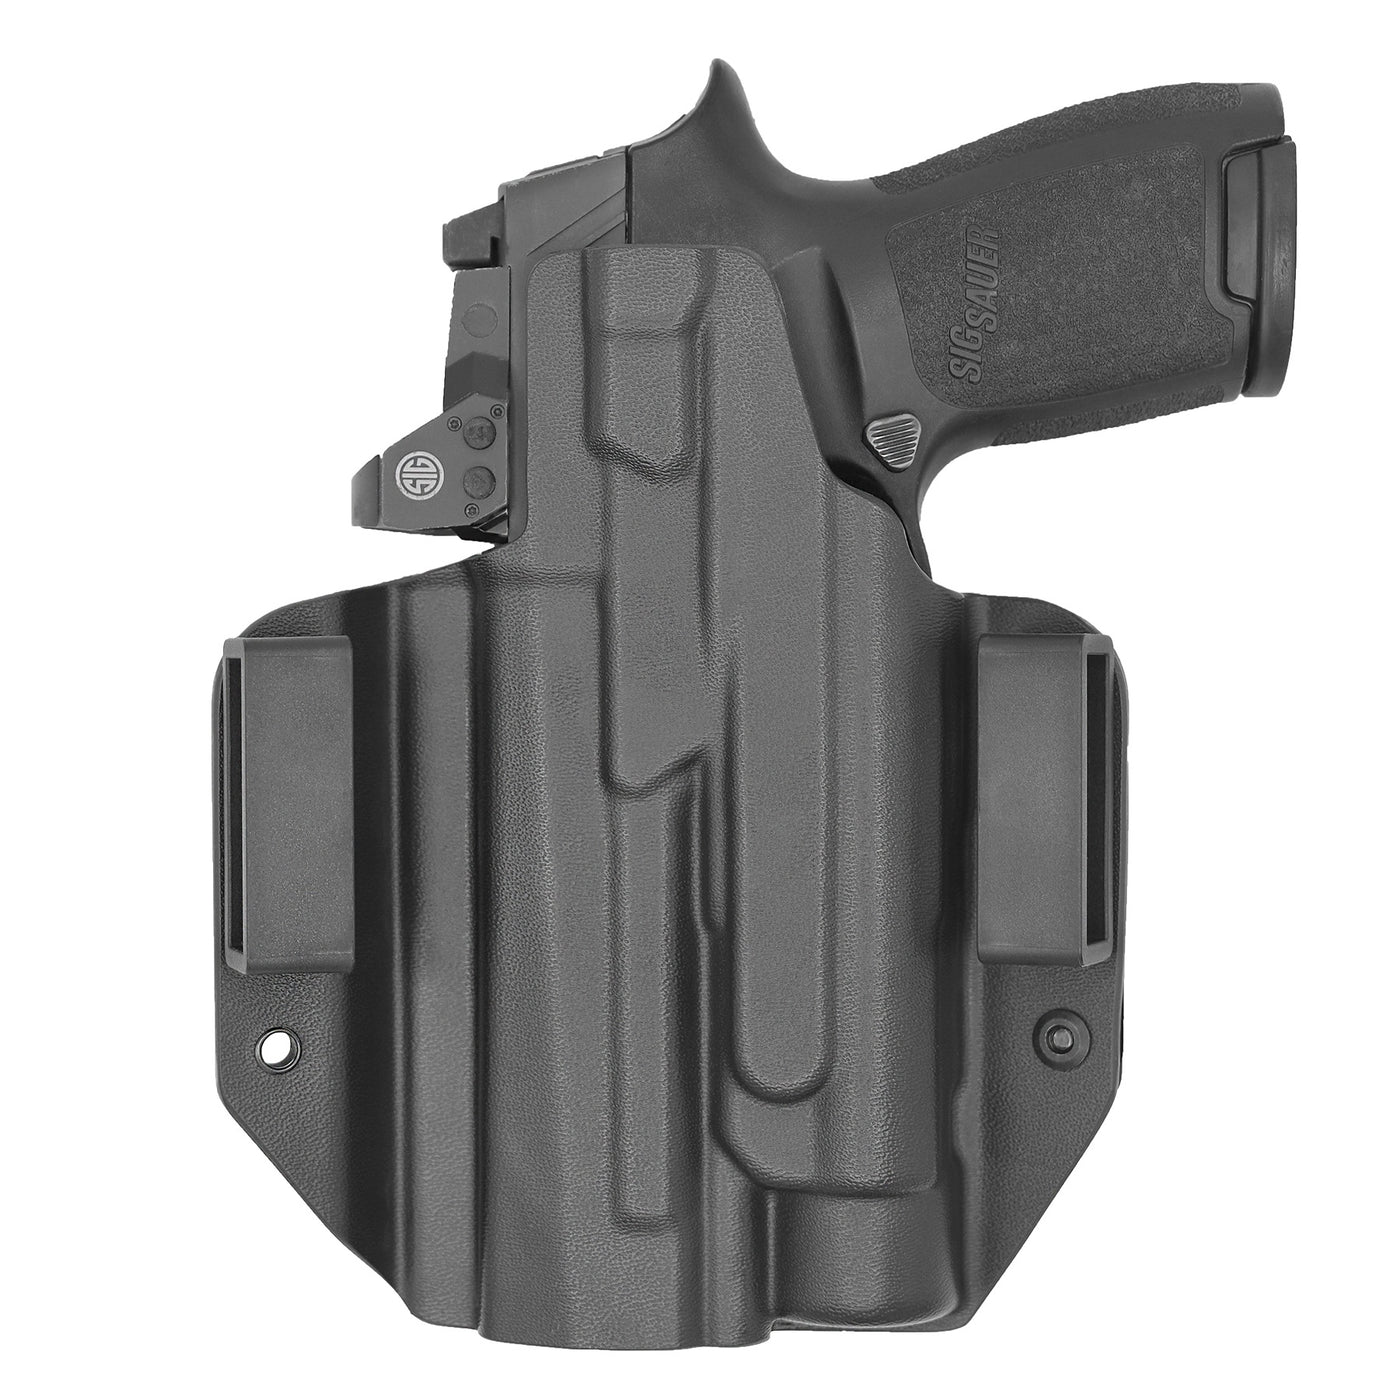 C&G holsters quickship OWB Tactical H&K 45 Streamlight TLR1 in holstered position back view